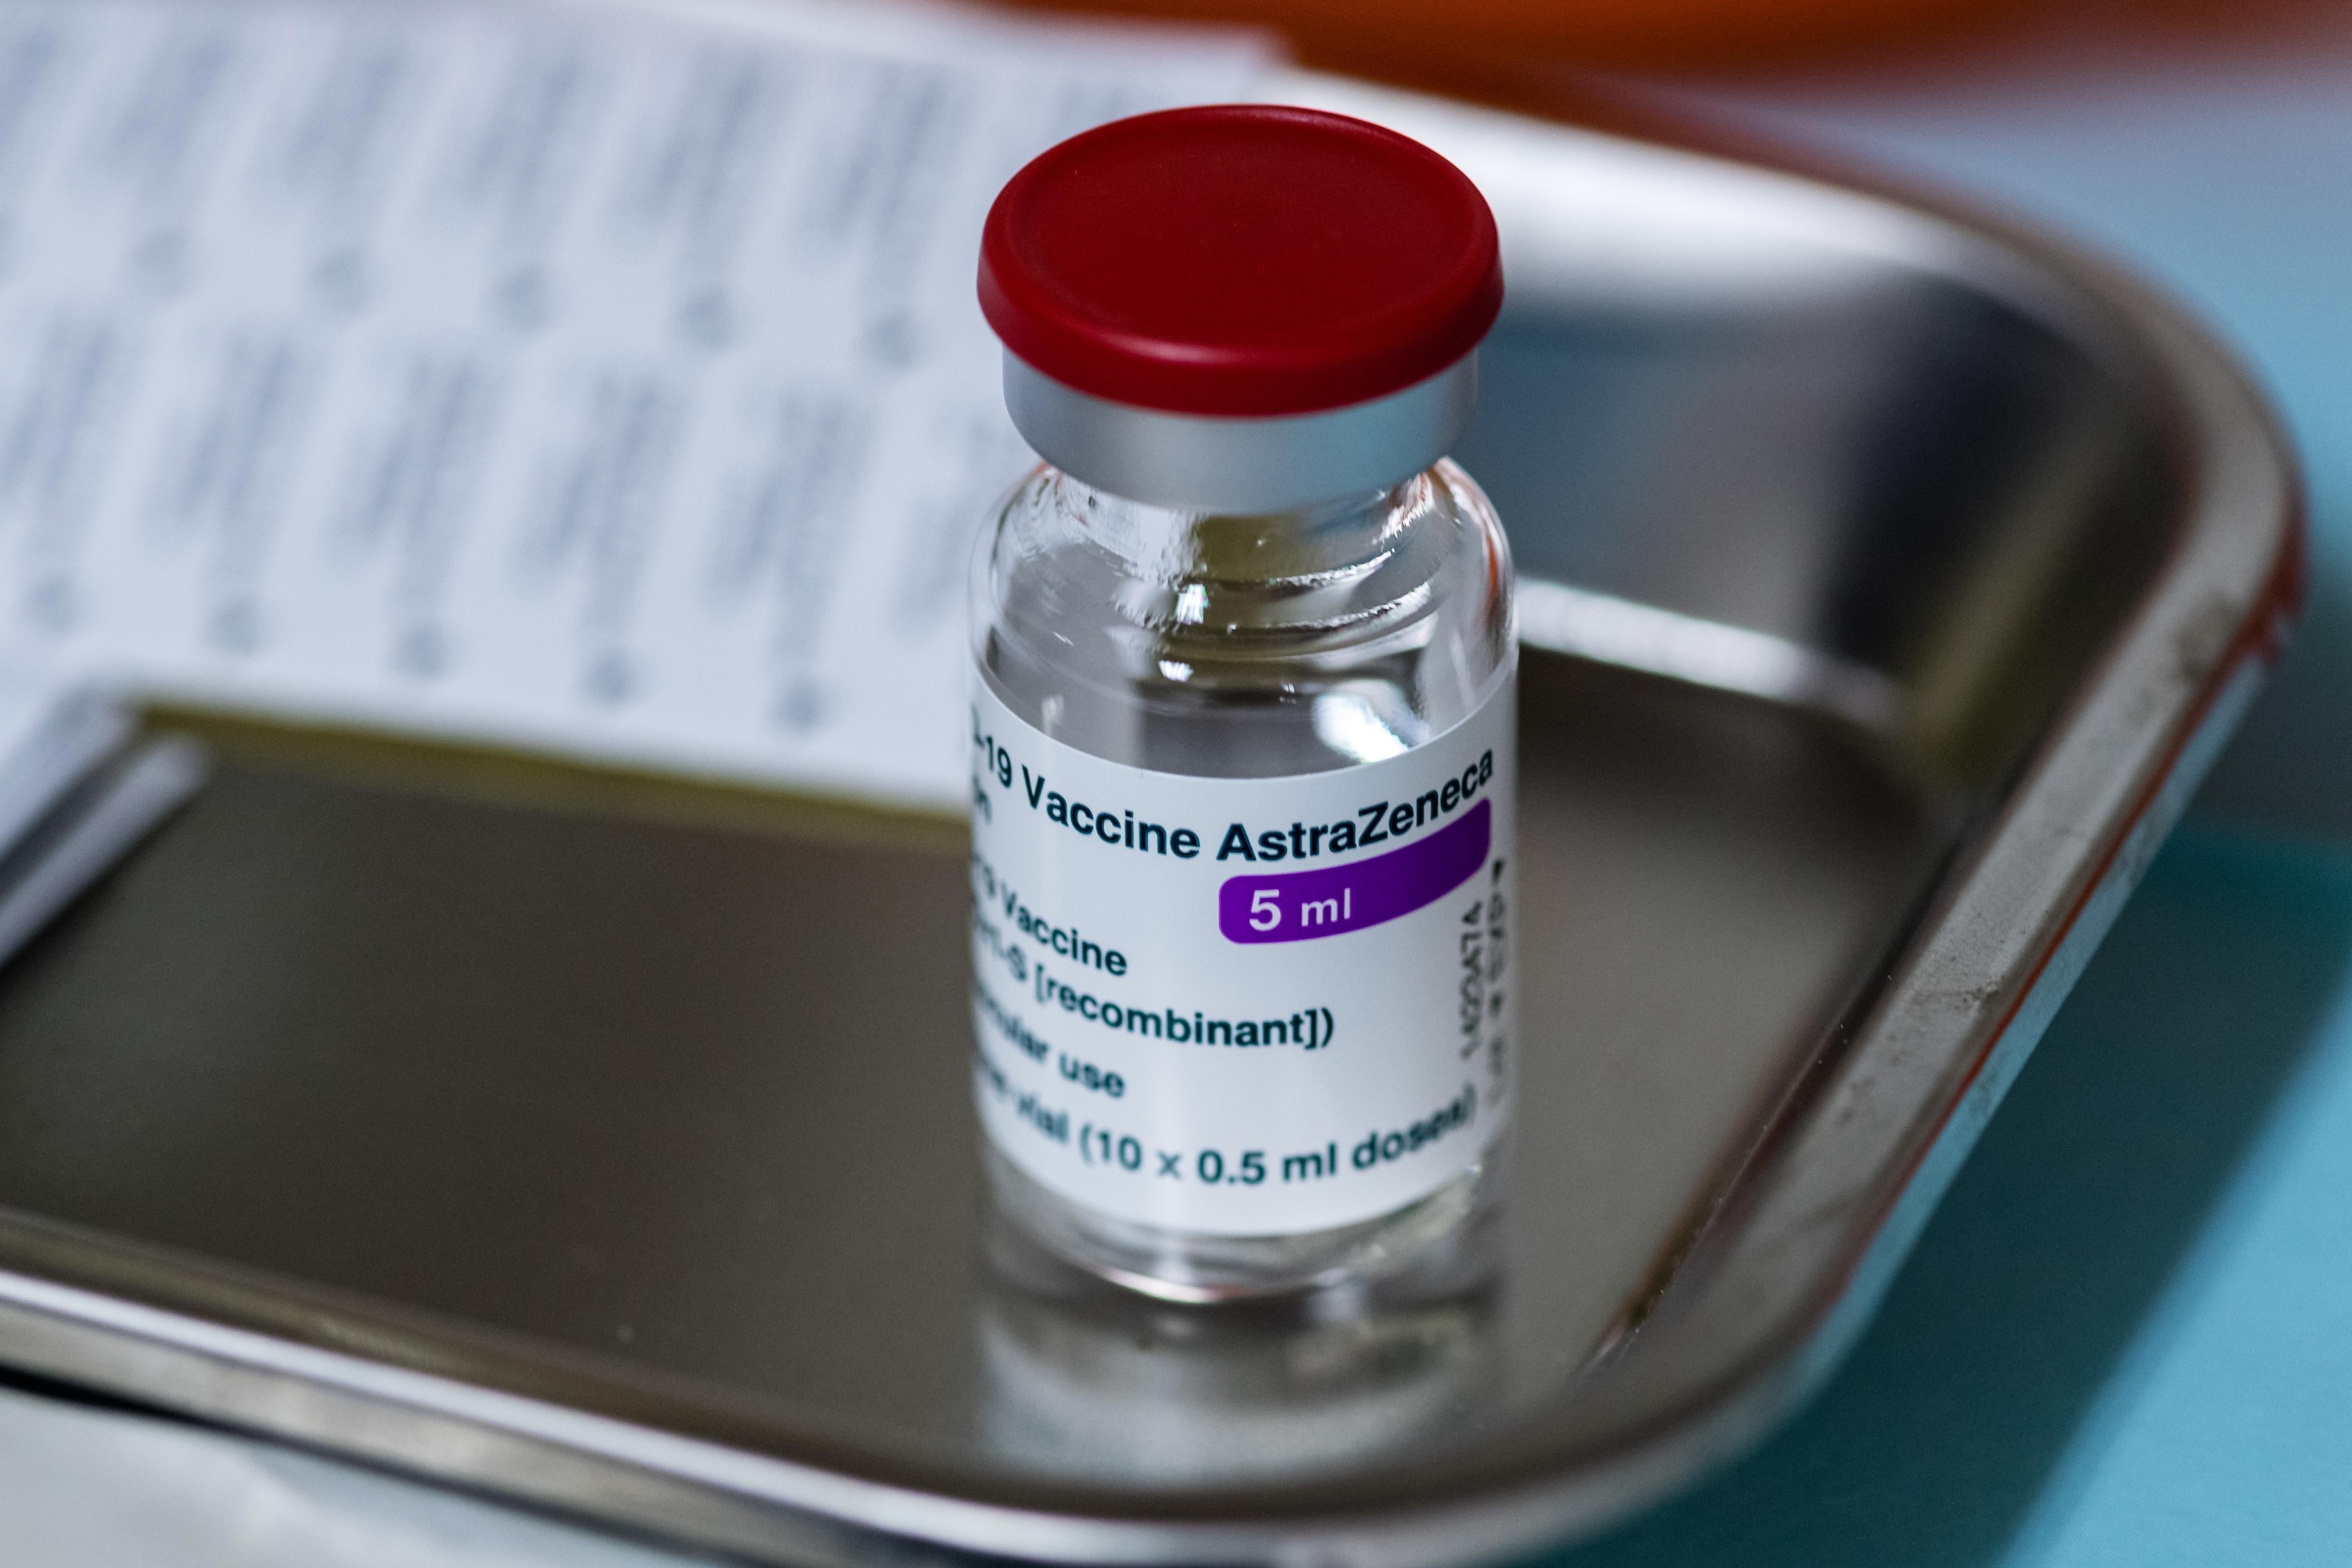 A vial of AstraZeneca COVID-19 vaccine sits on a metal tray.